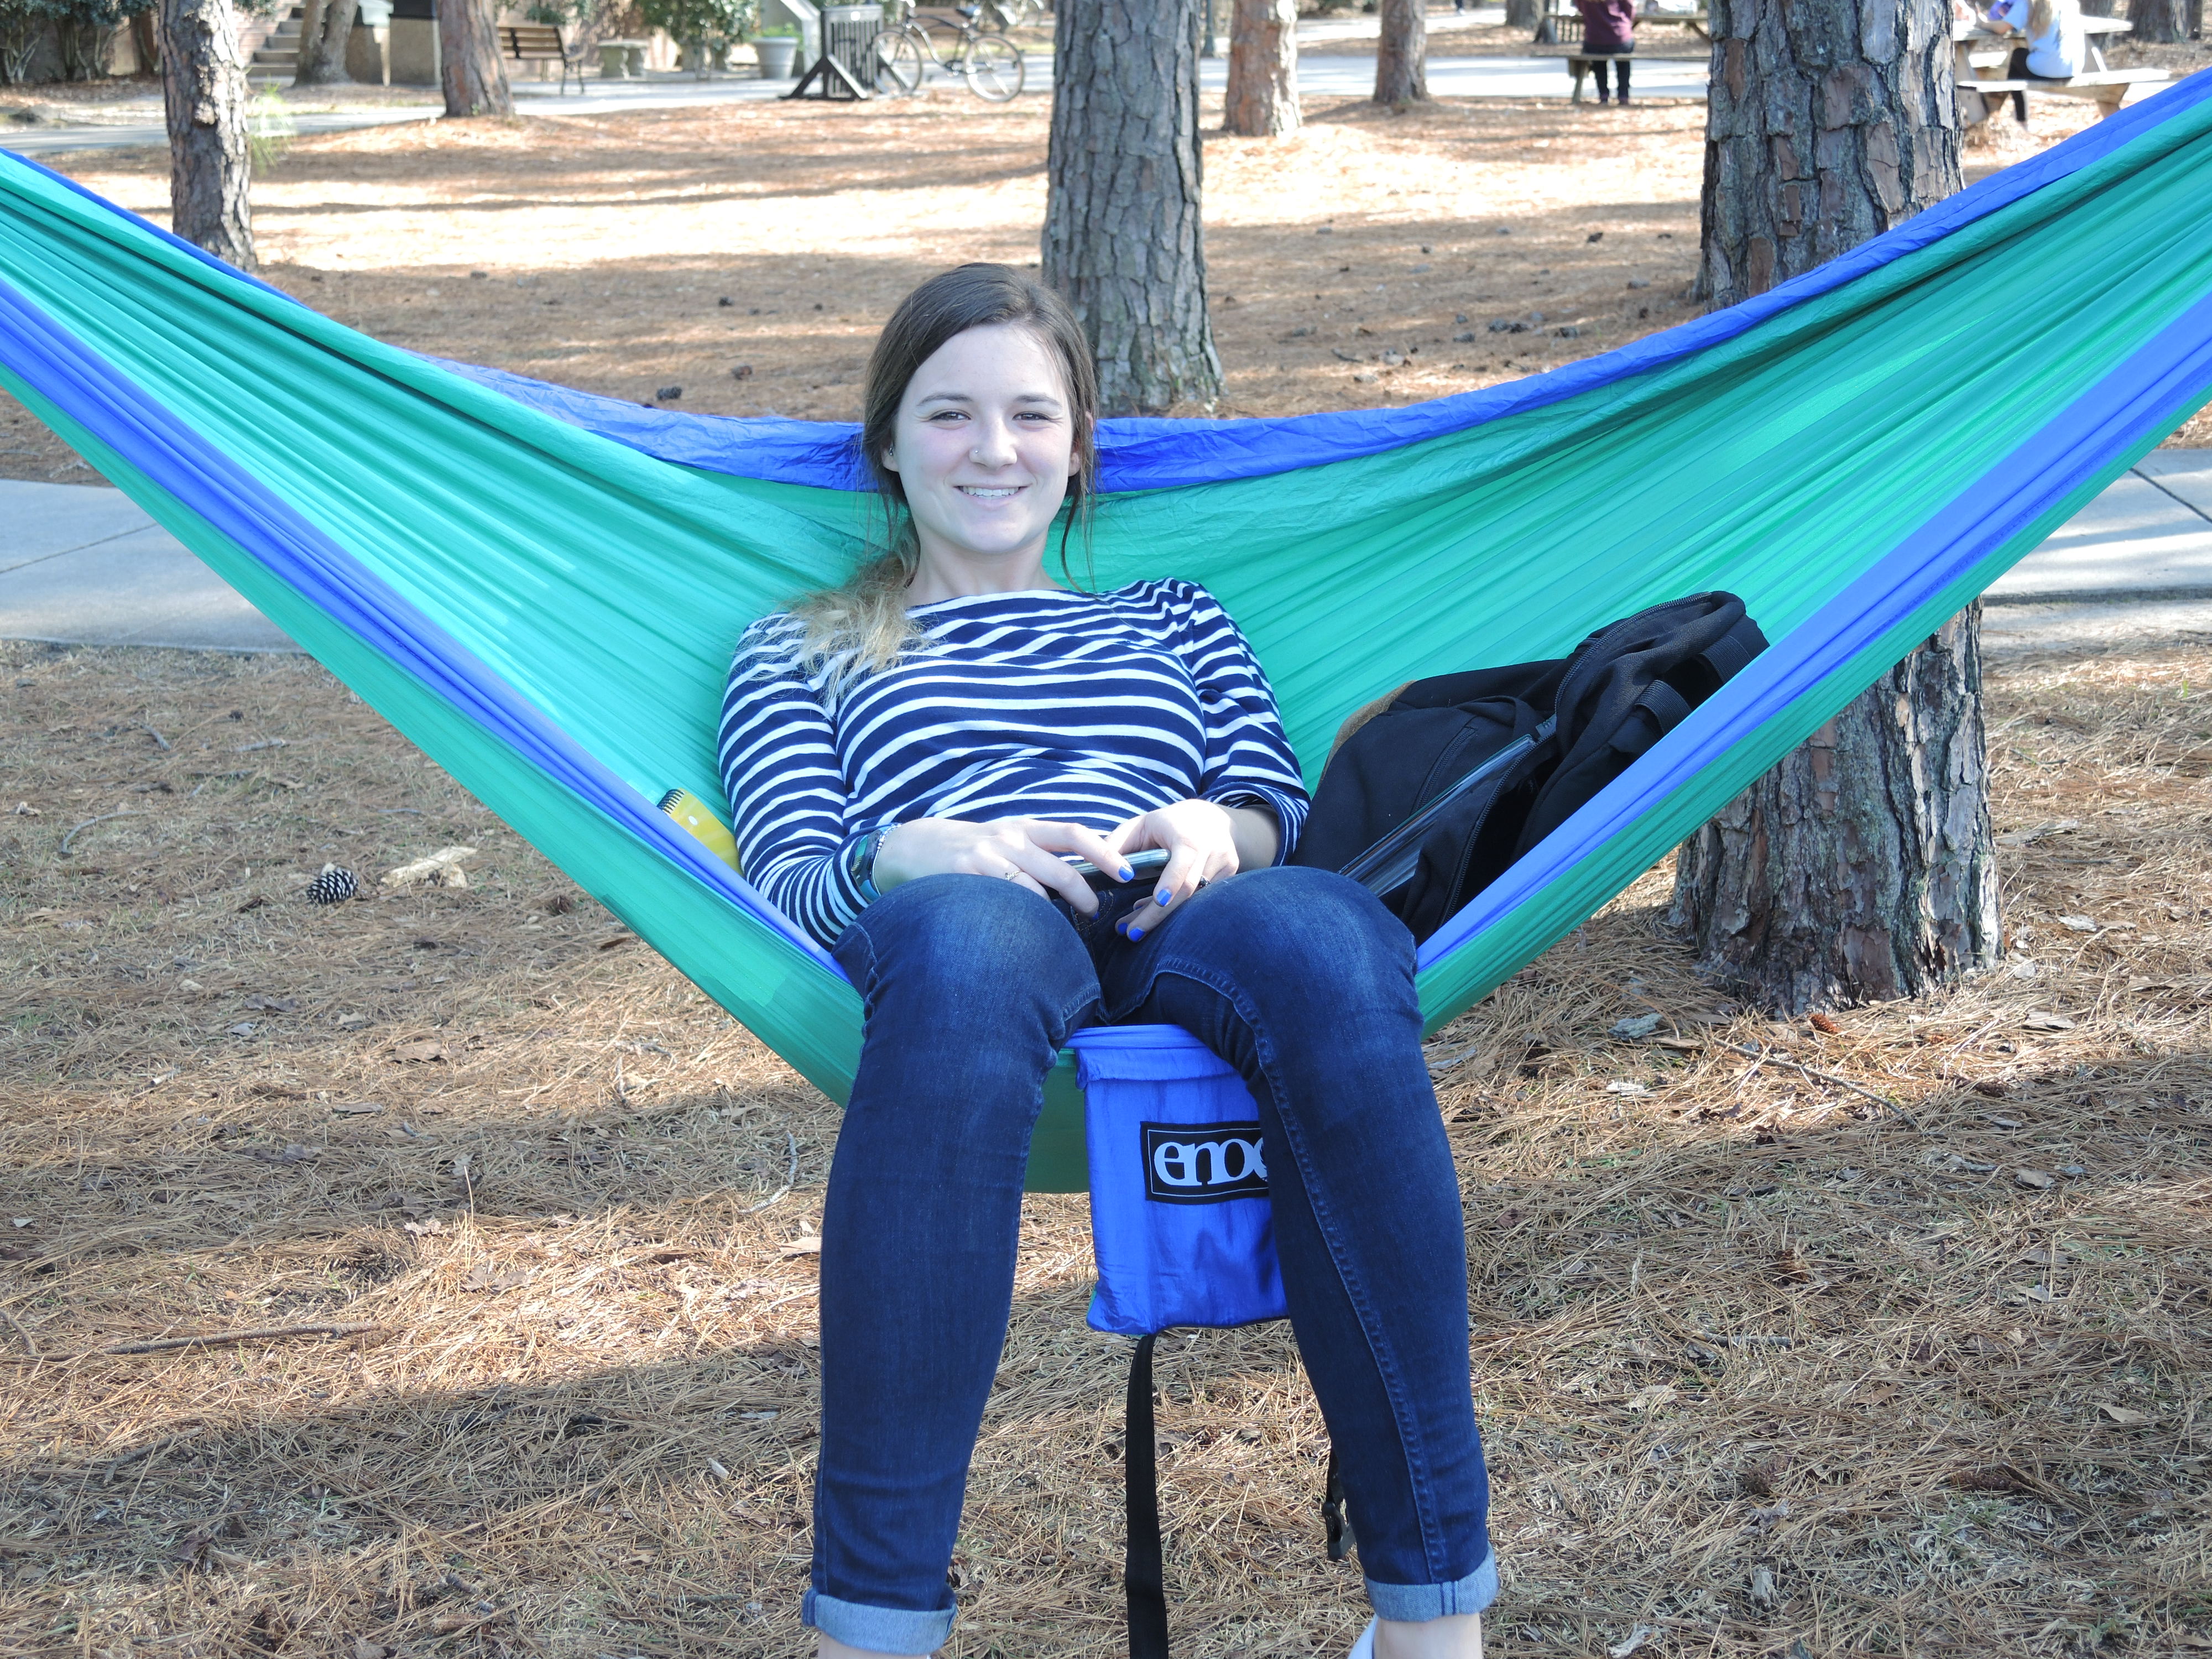 This student set up her hammock in the shade. Yes, there is a hammock club at Coastal.